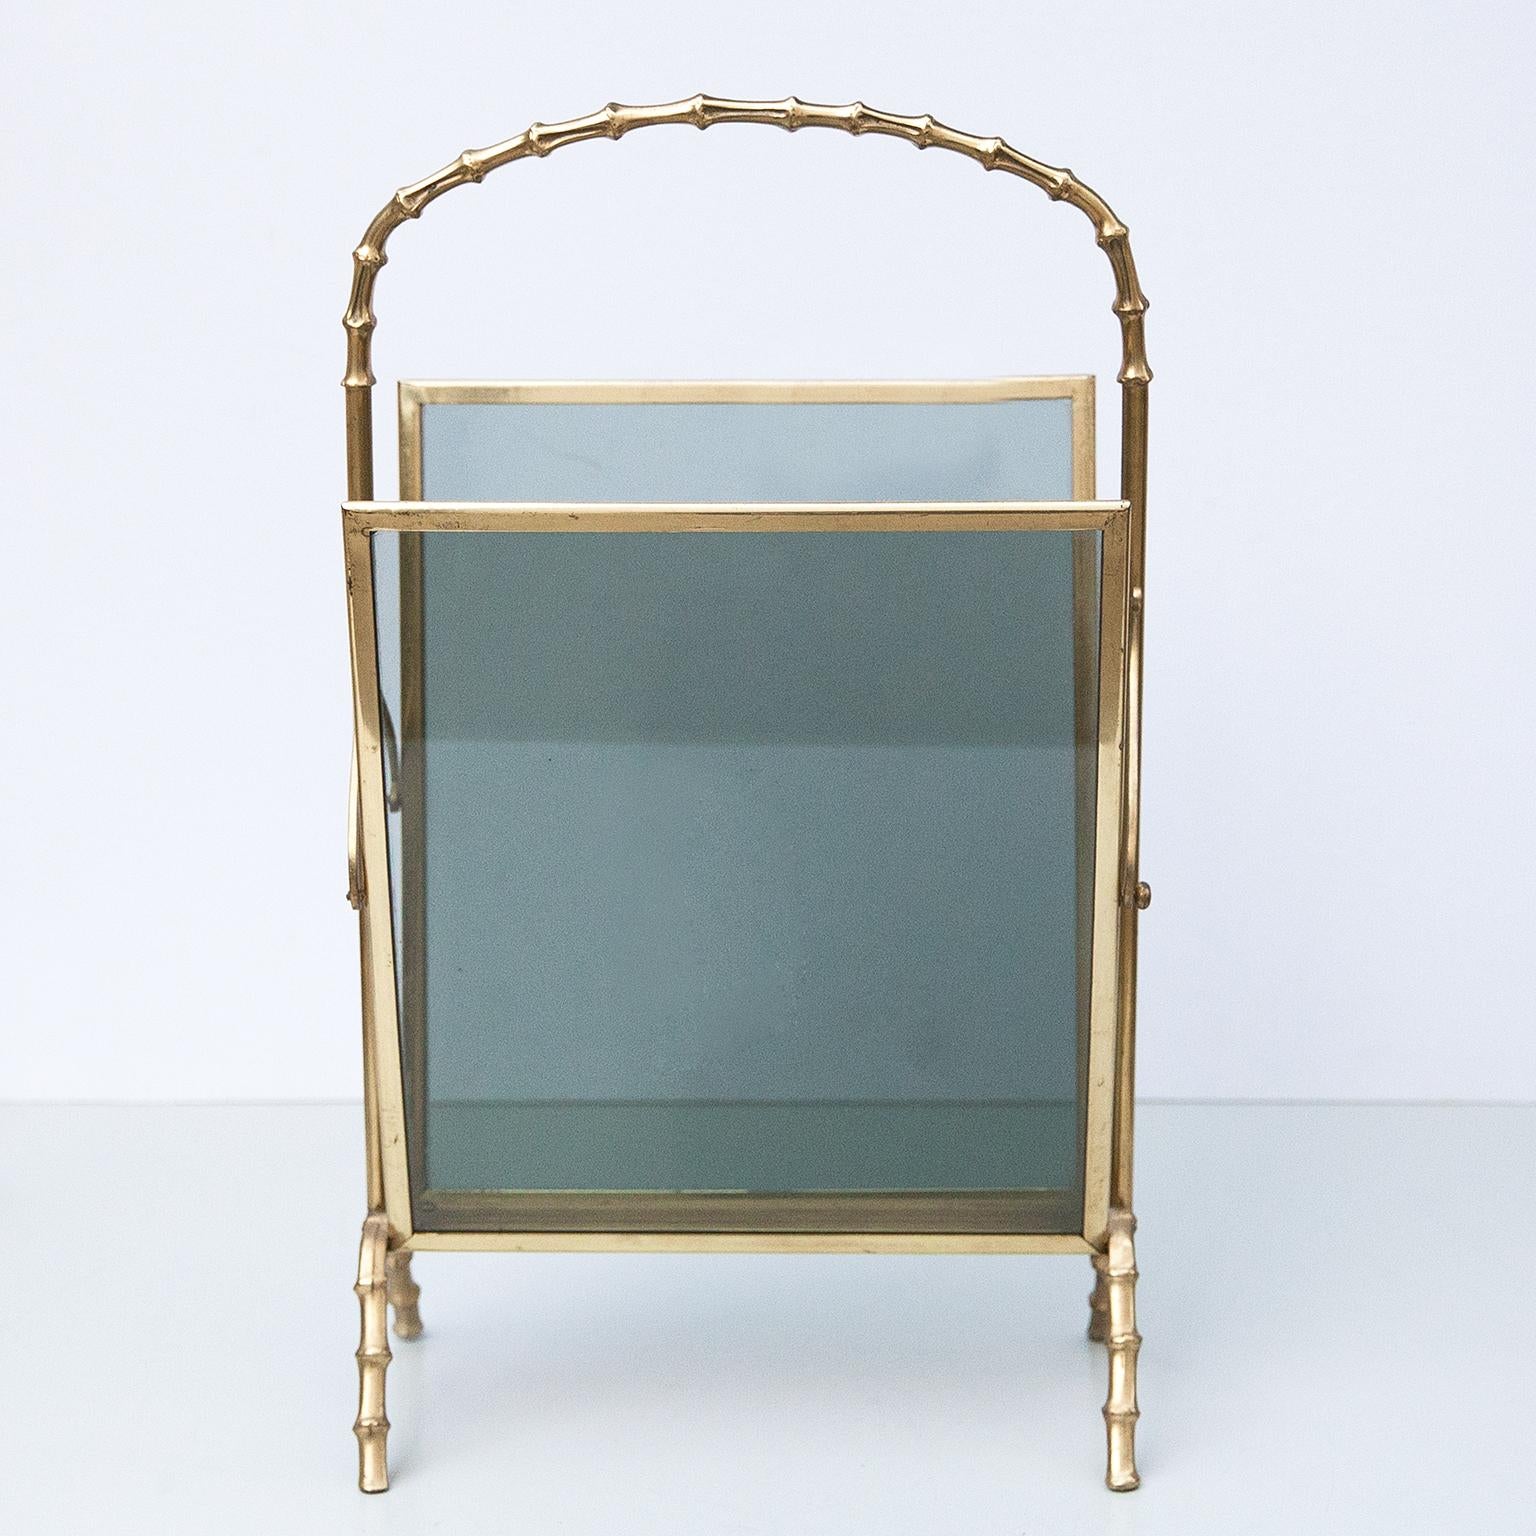 Magazine rack made by Maison Baguès in a faux bamboo brass structure and glass. Made in France, circa 1950 in very good vintage condition.